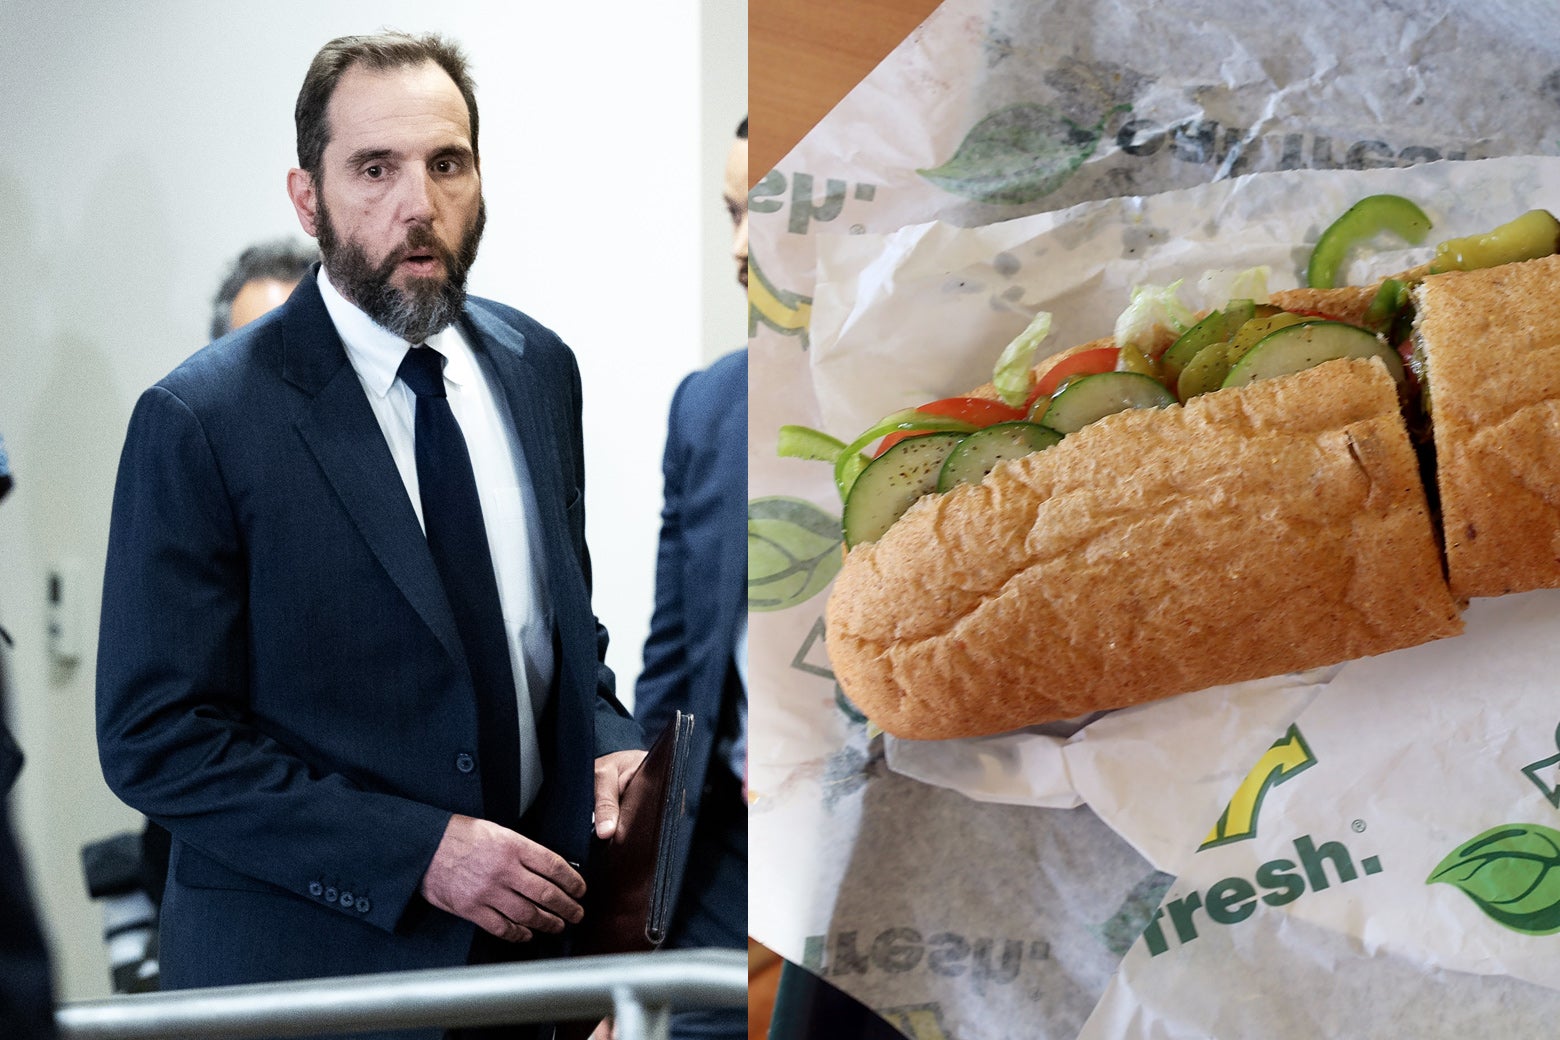 CNN Speculates on the Meaning of Jack Smith’s Trip to Subway Ben Mathis-Lilley